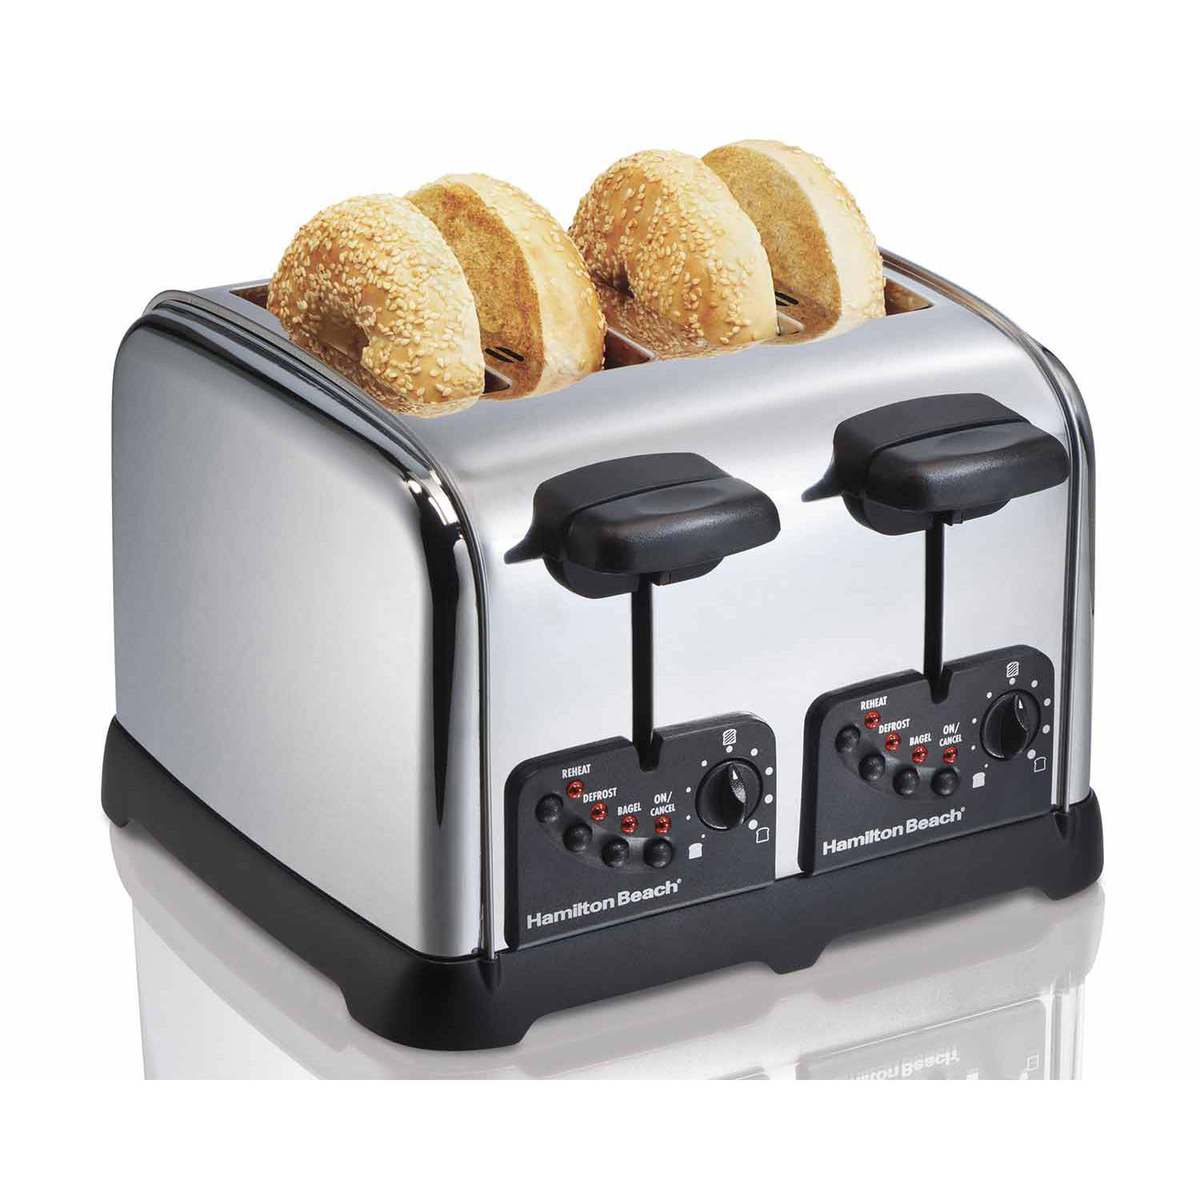 What Does Bagel Button On Toaster Do